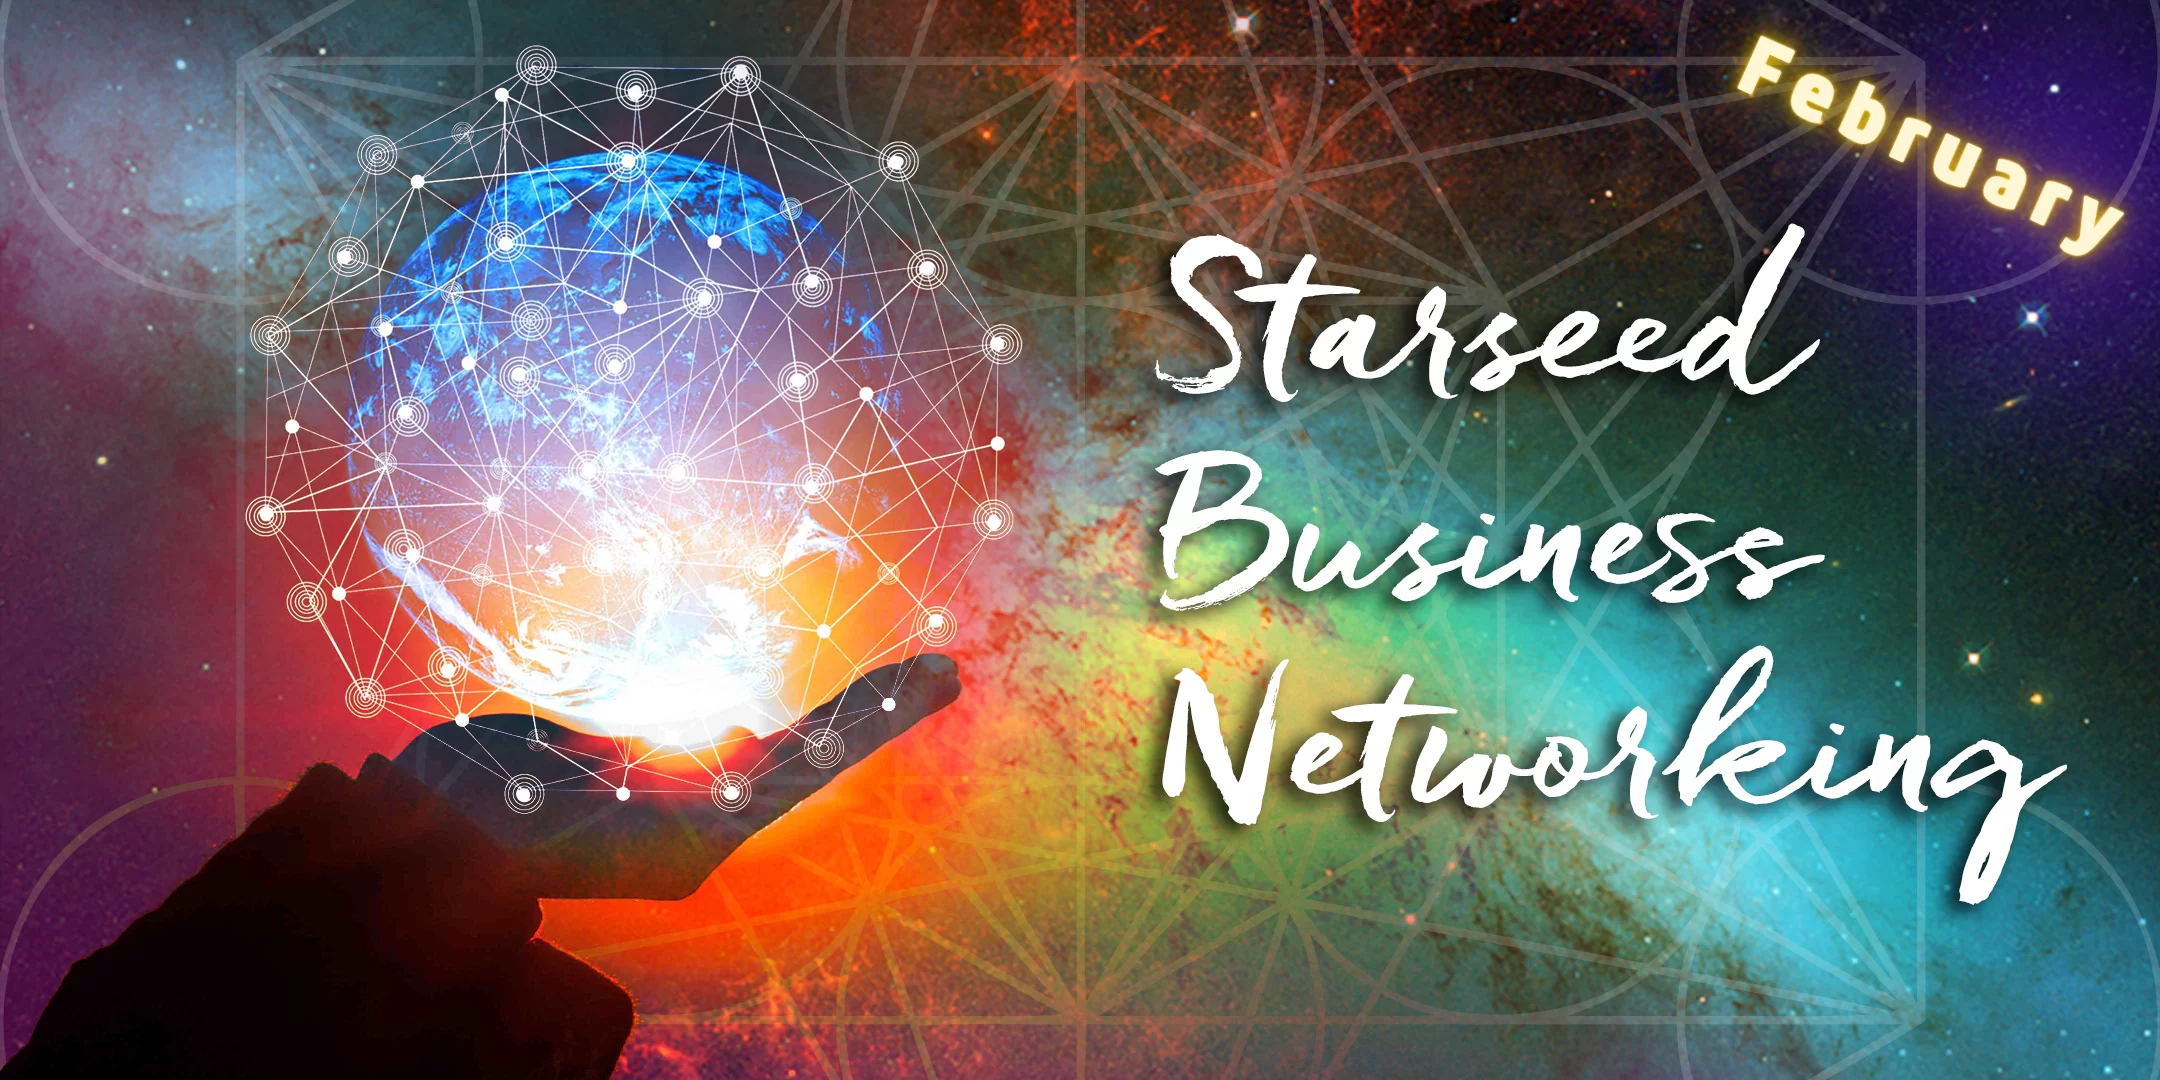 Starseed Business Networking – February Meeting